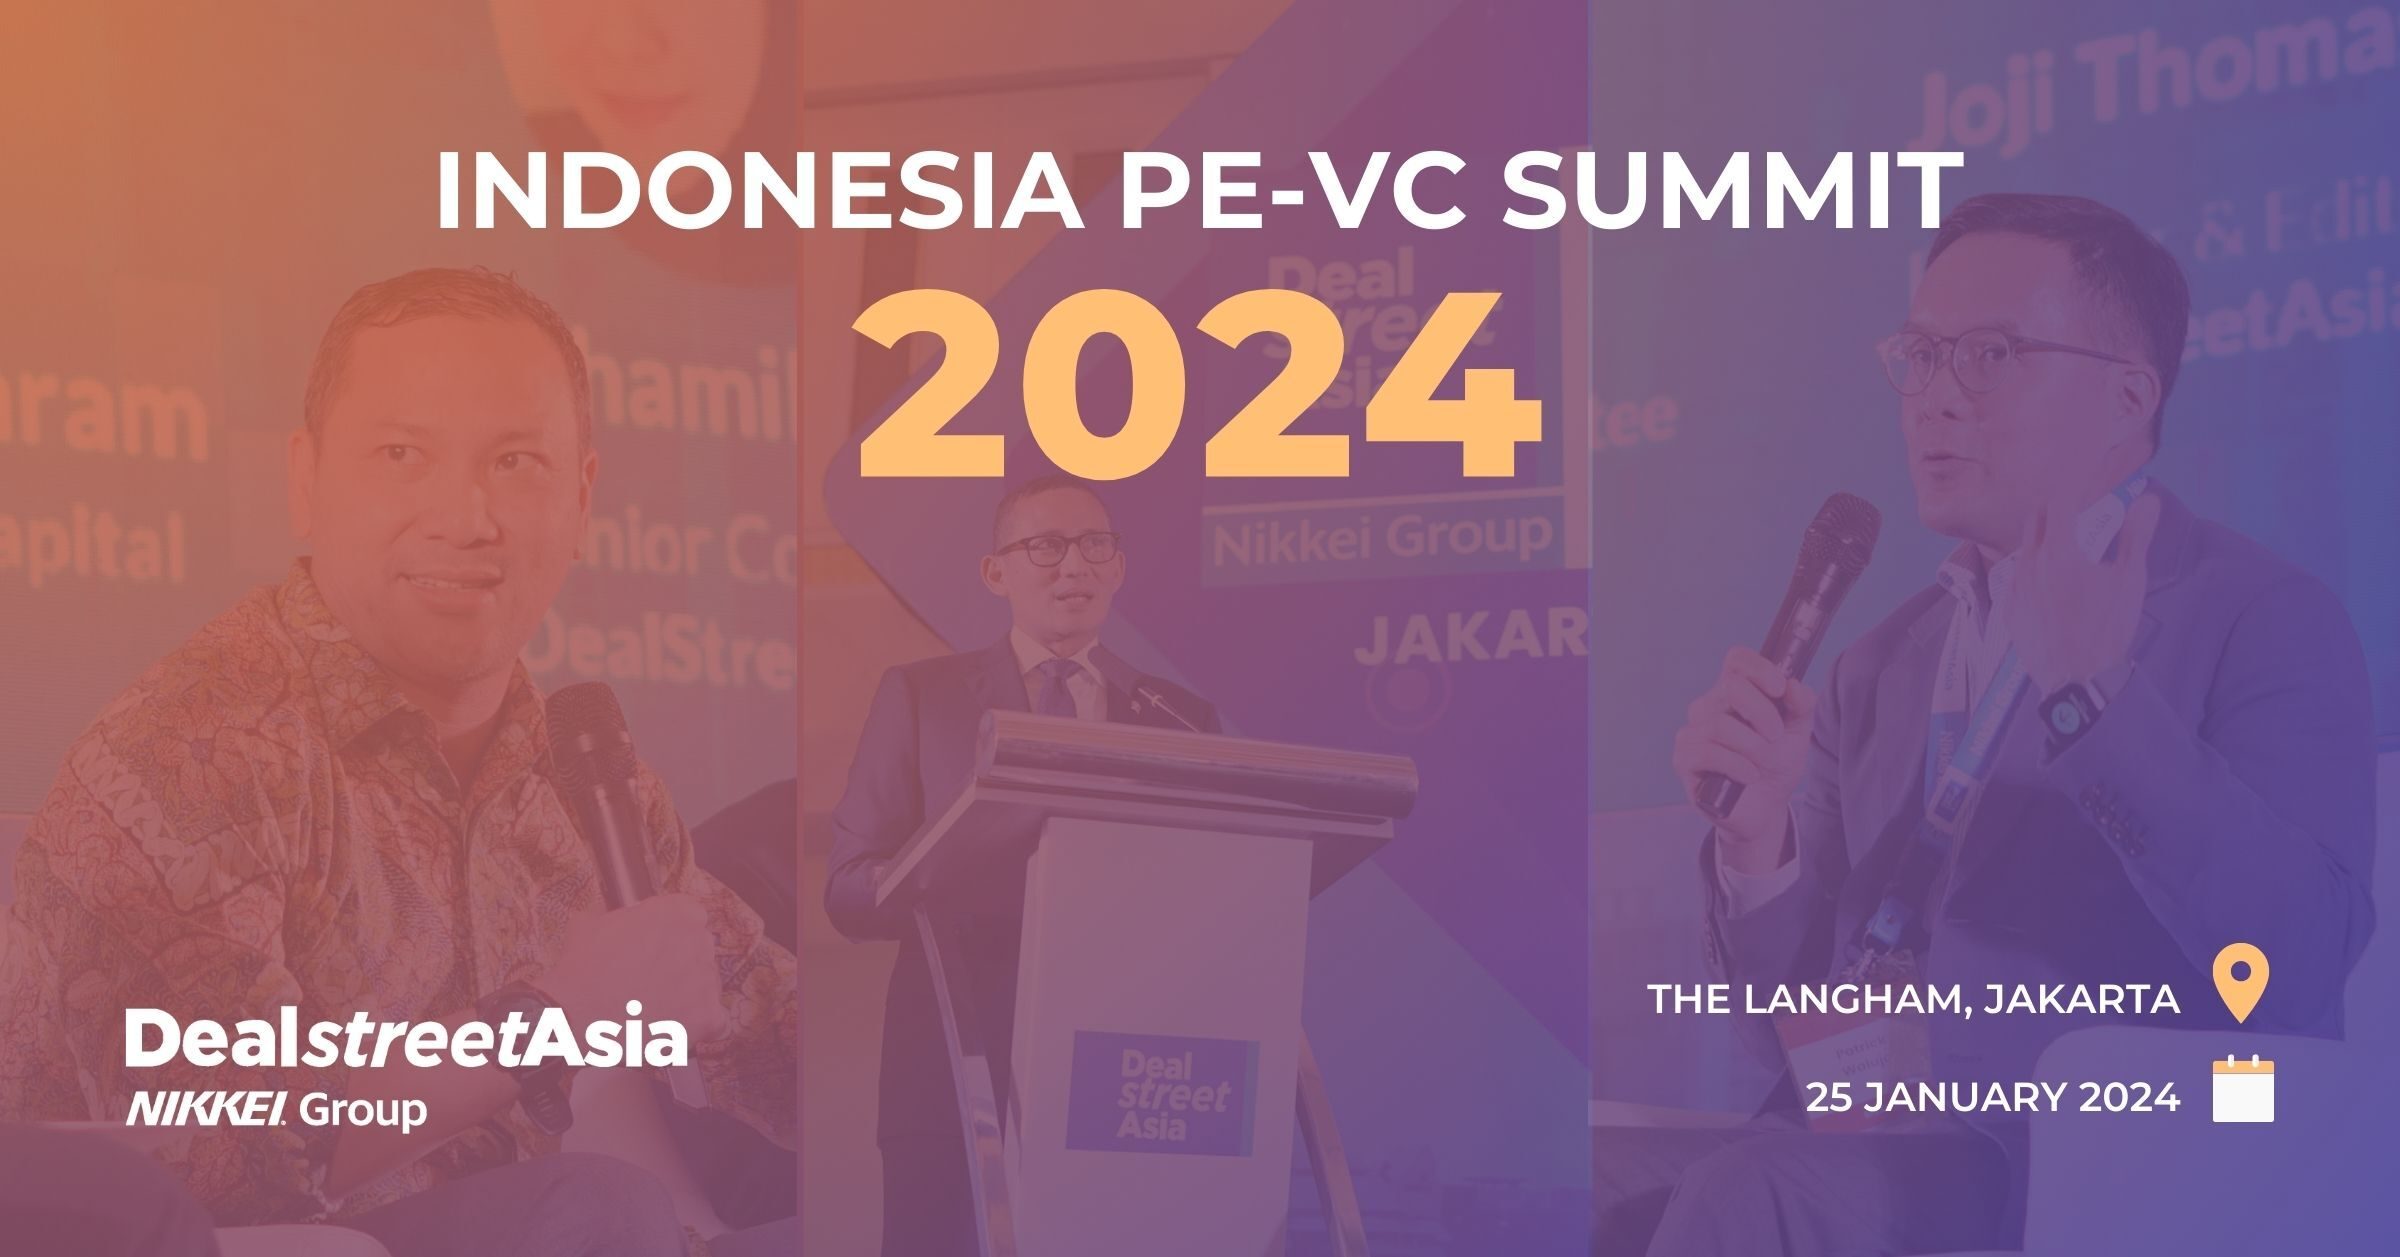 Why are investors bullish on 5 sectors? Gain insights at Indonesia PE-VC Summit